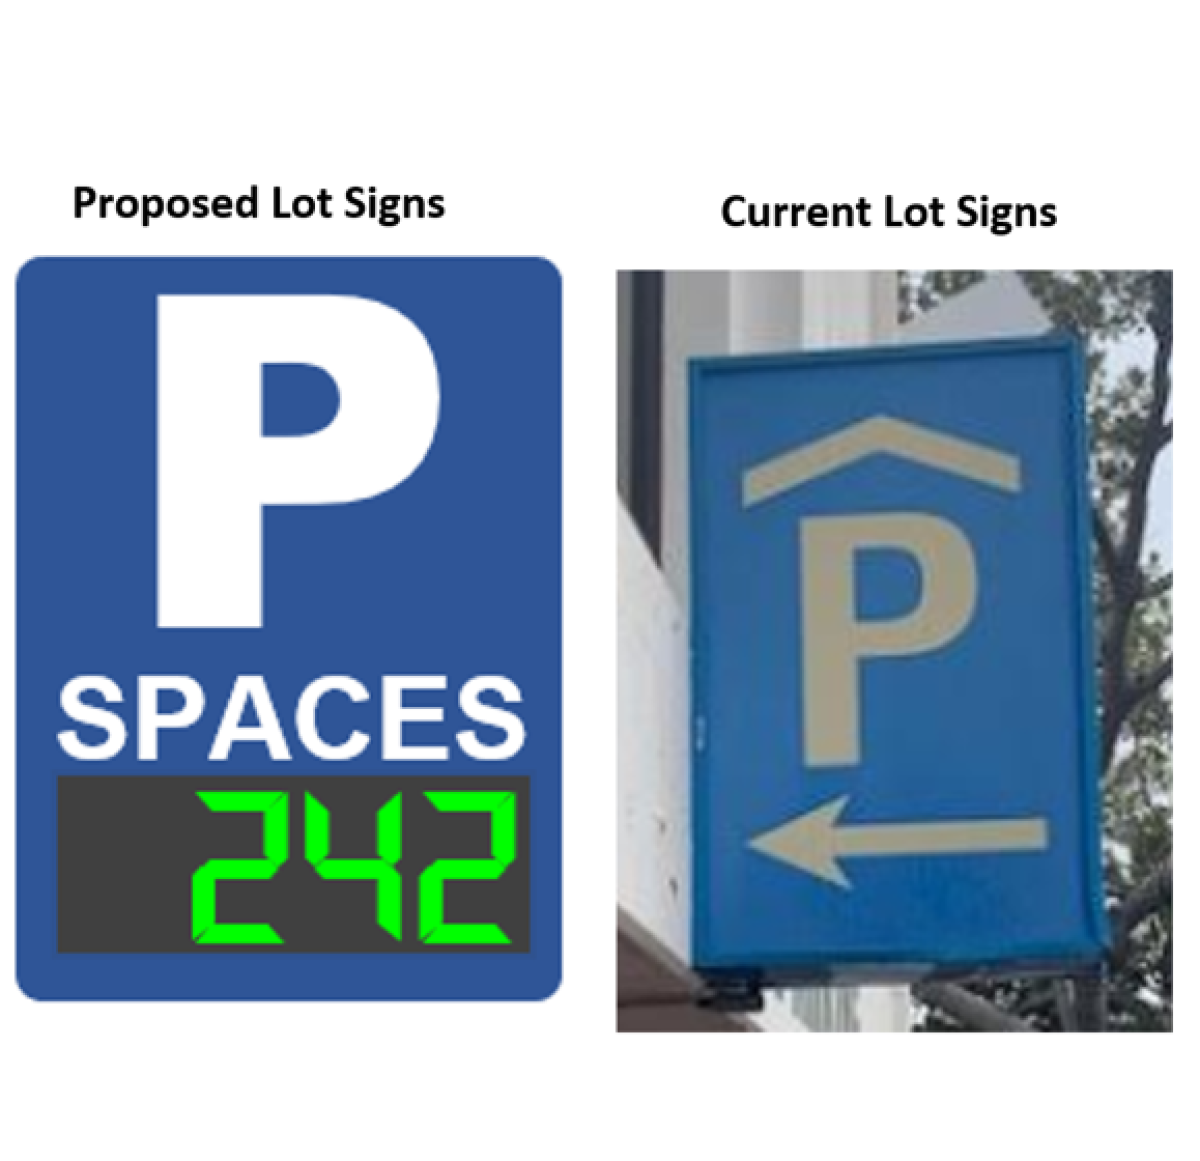 A side-by-side perspective shows what parking lot signs in La Jolla could look like compared with what they look like now.